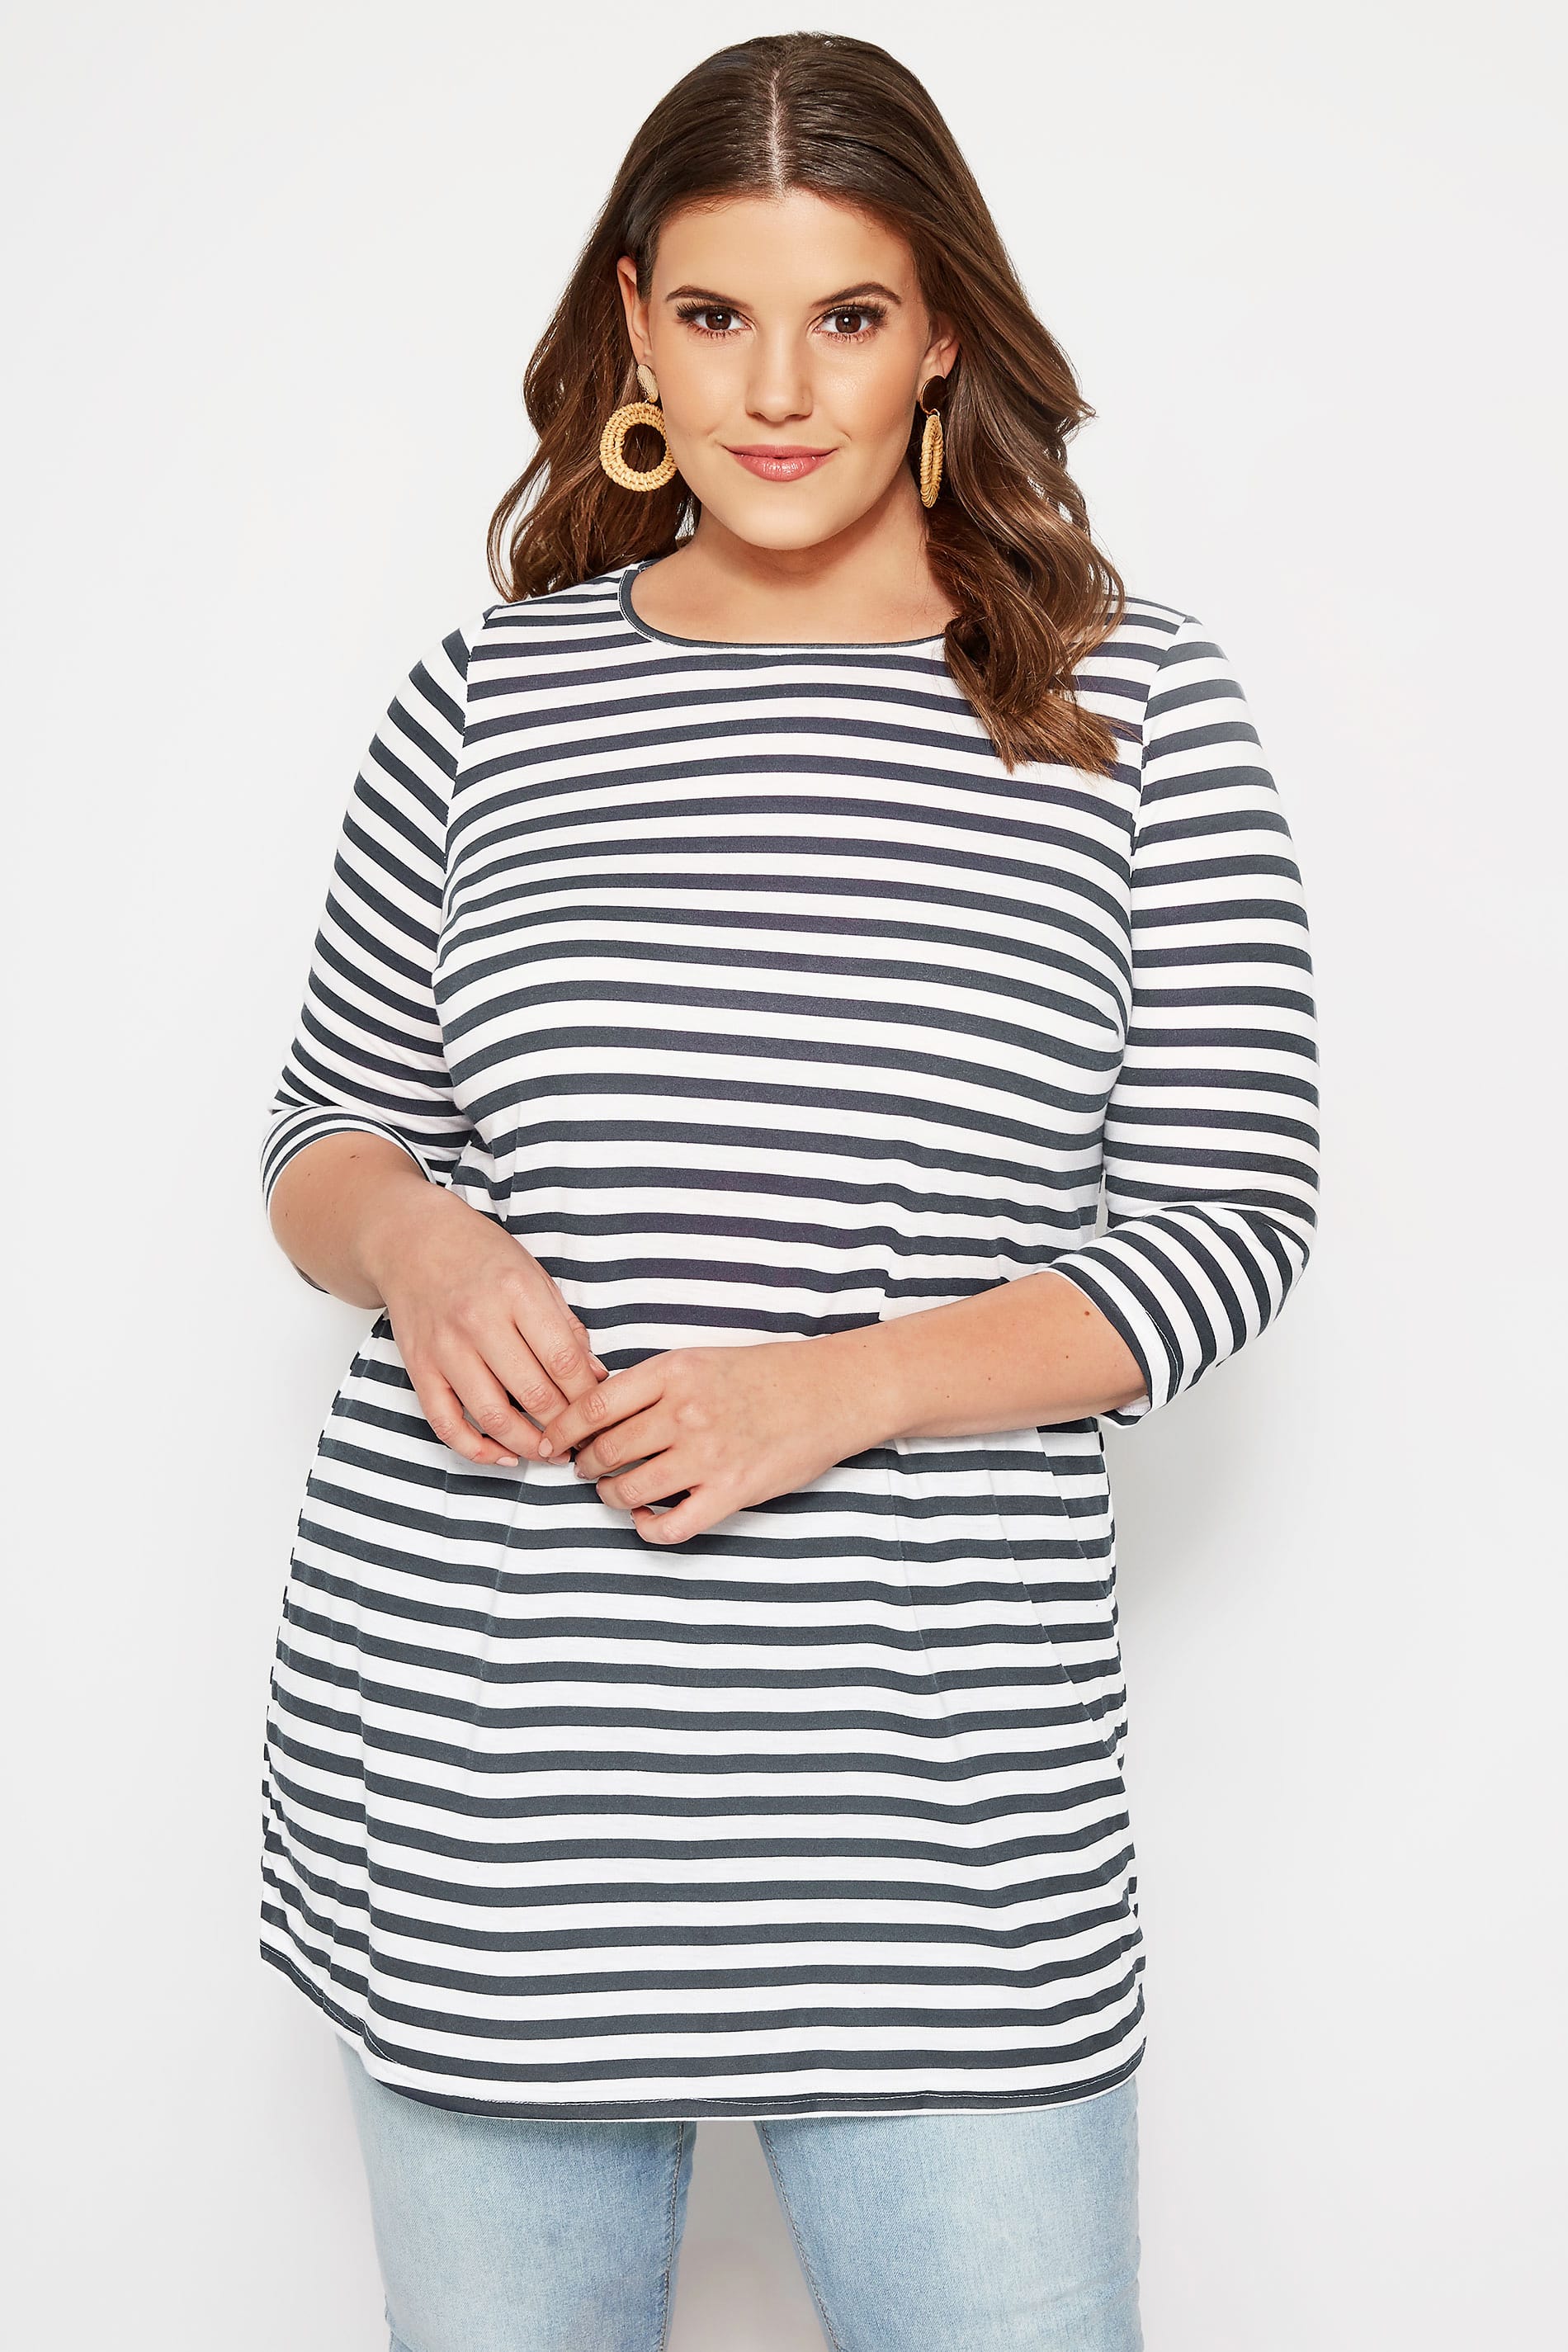 SIZE UP Navy & White Striped Longline Top | Plus Sizes 16 to 36 | Yours ...